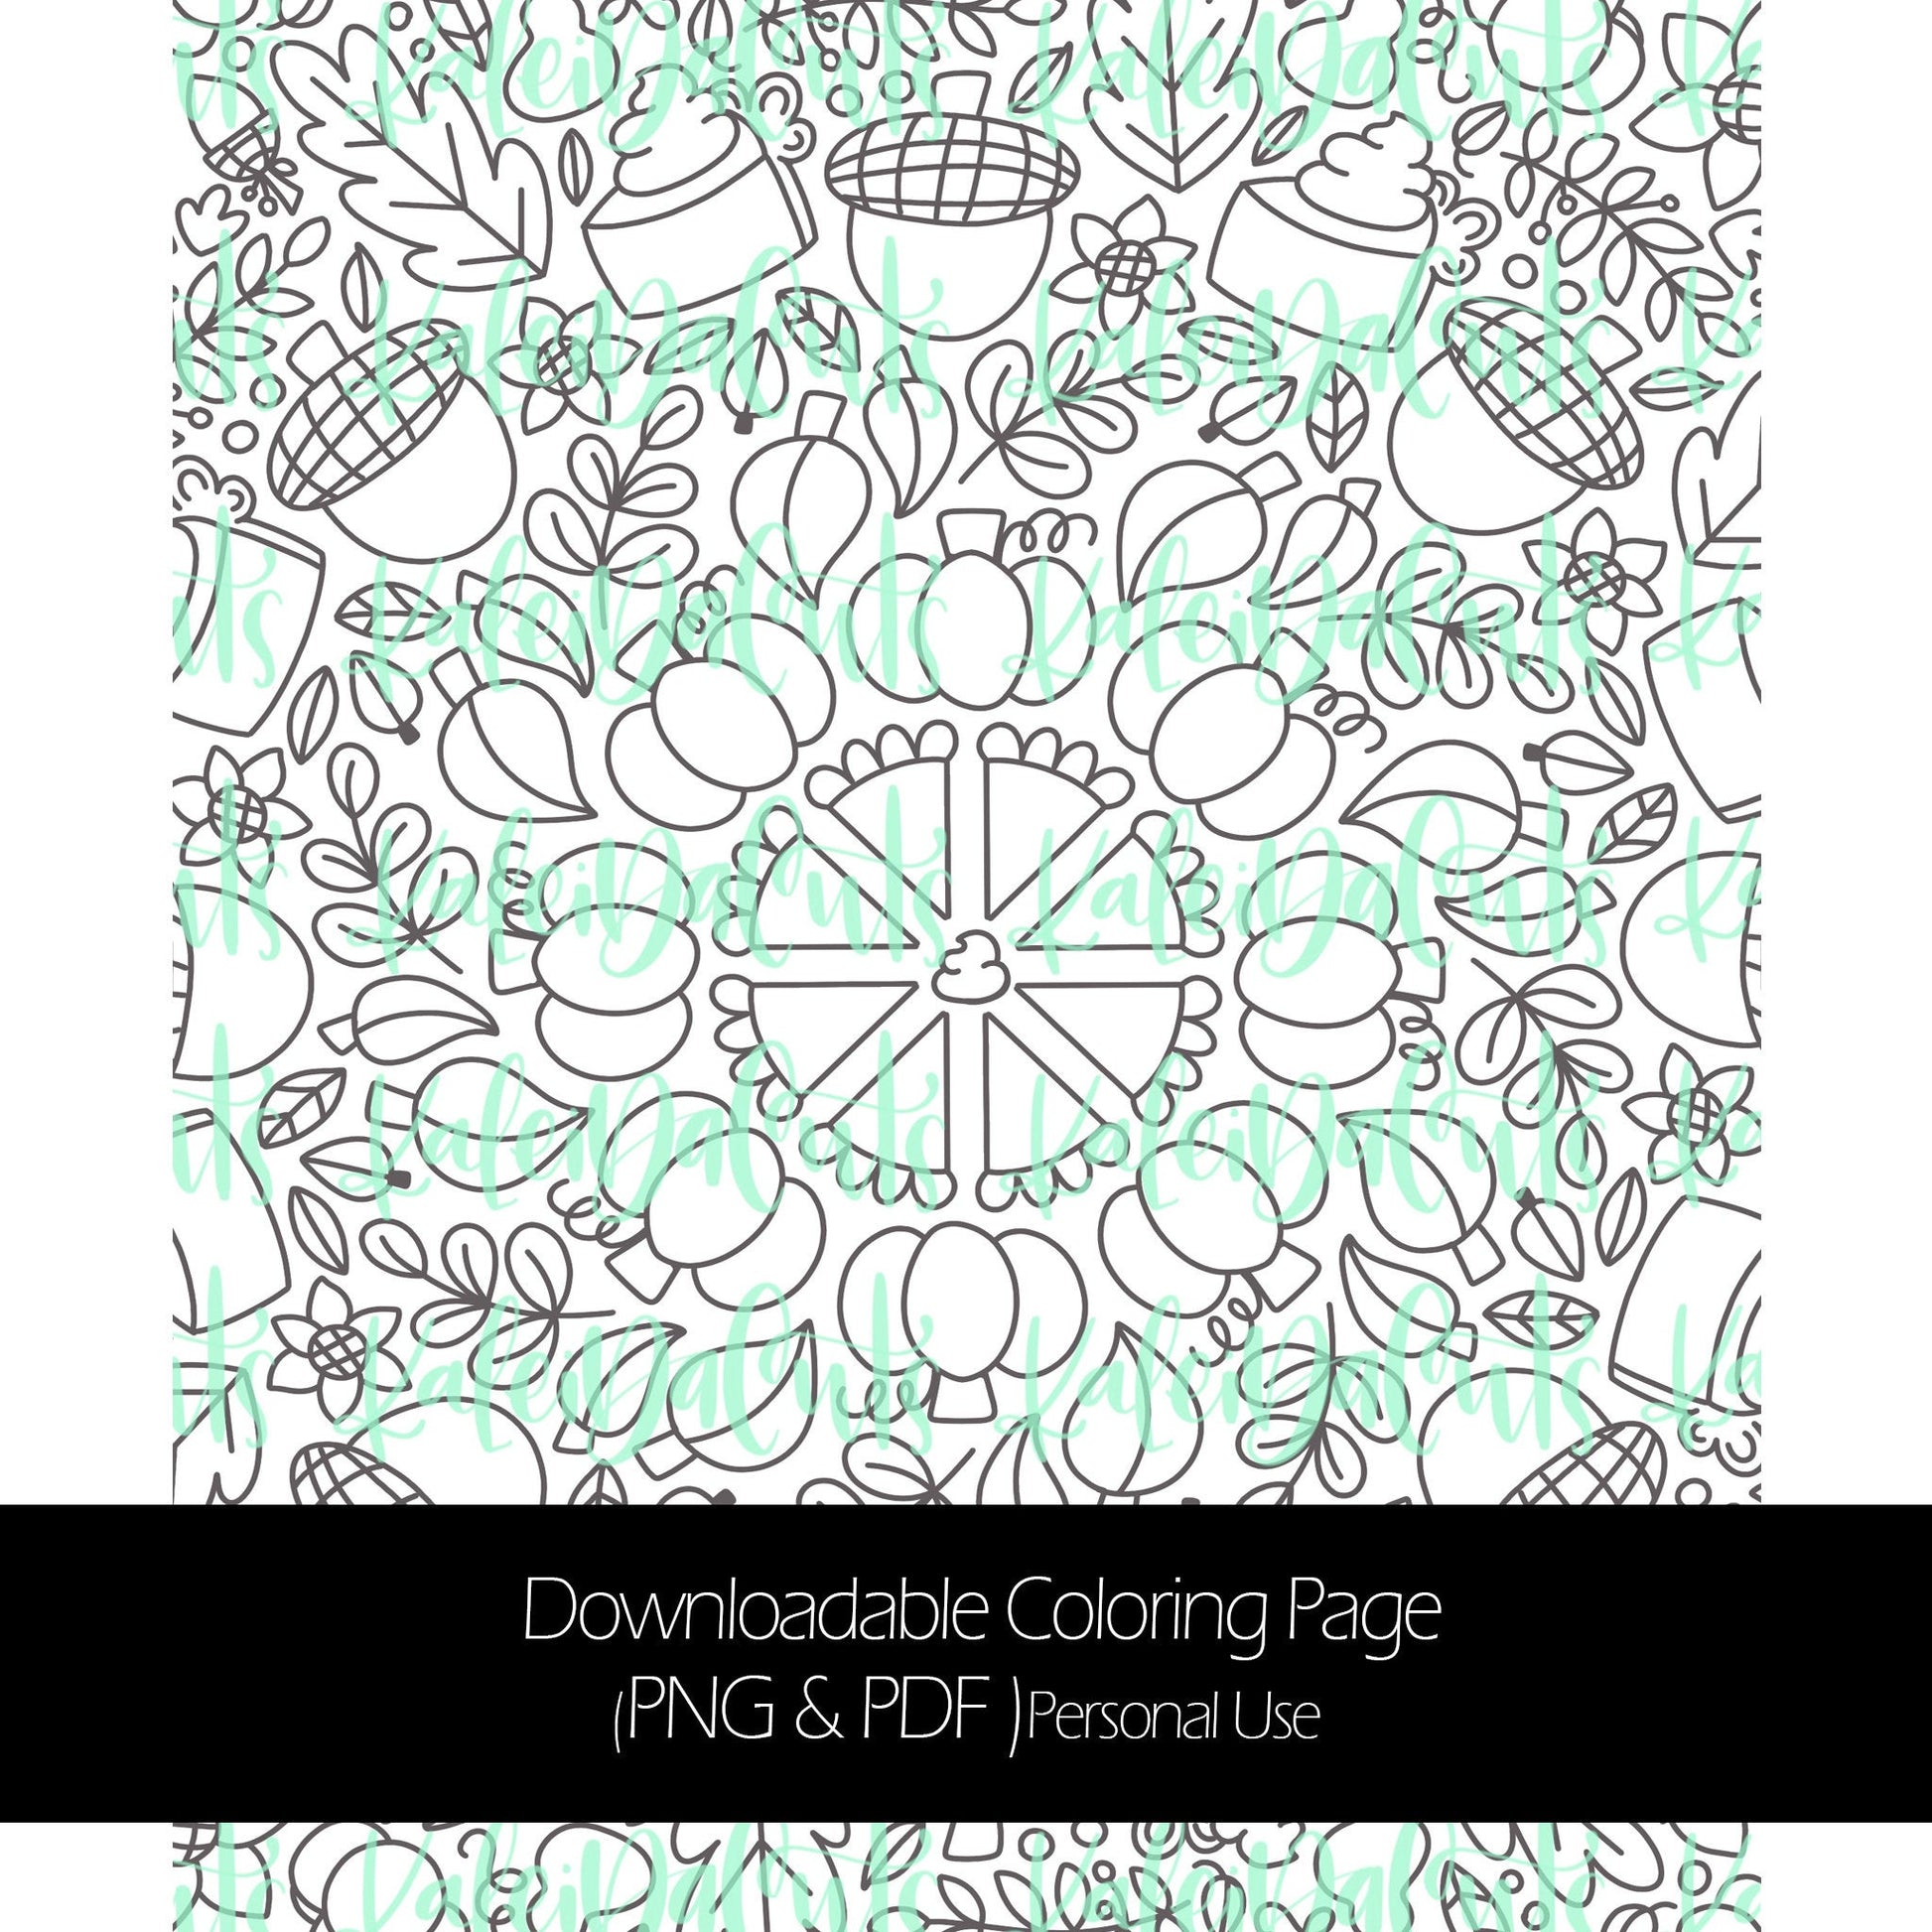 November Downloadable Coloring Page. Personal Use. KaleidaCuts Handlettering.